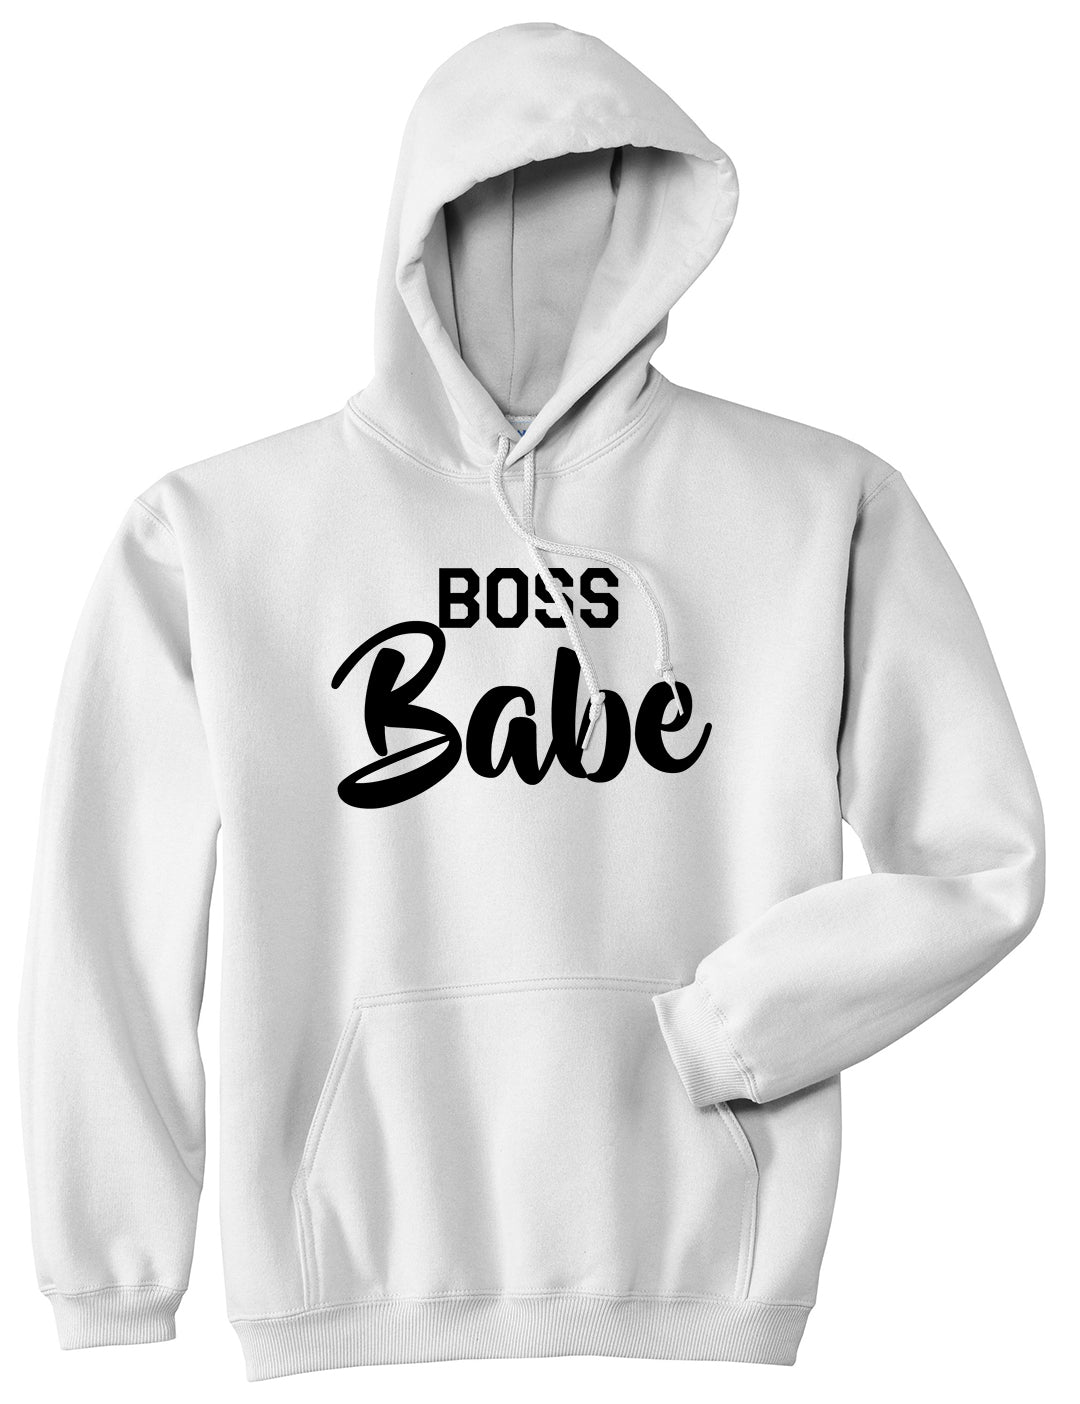 Boss Babe Mens White Pullover Hoodie by KINGS OF NY